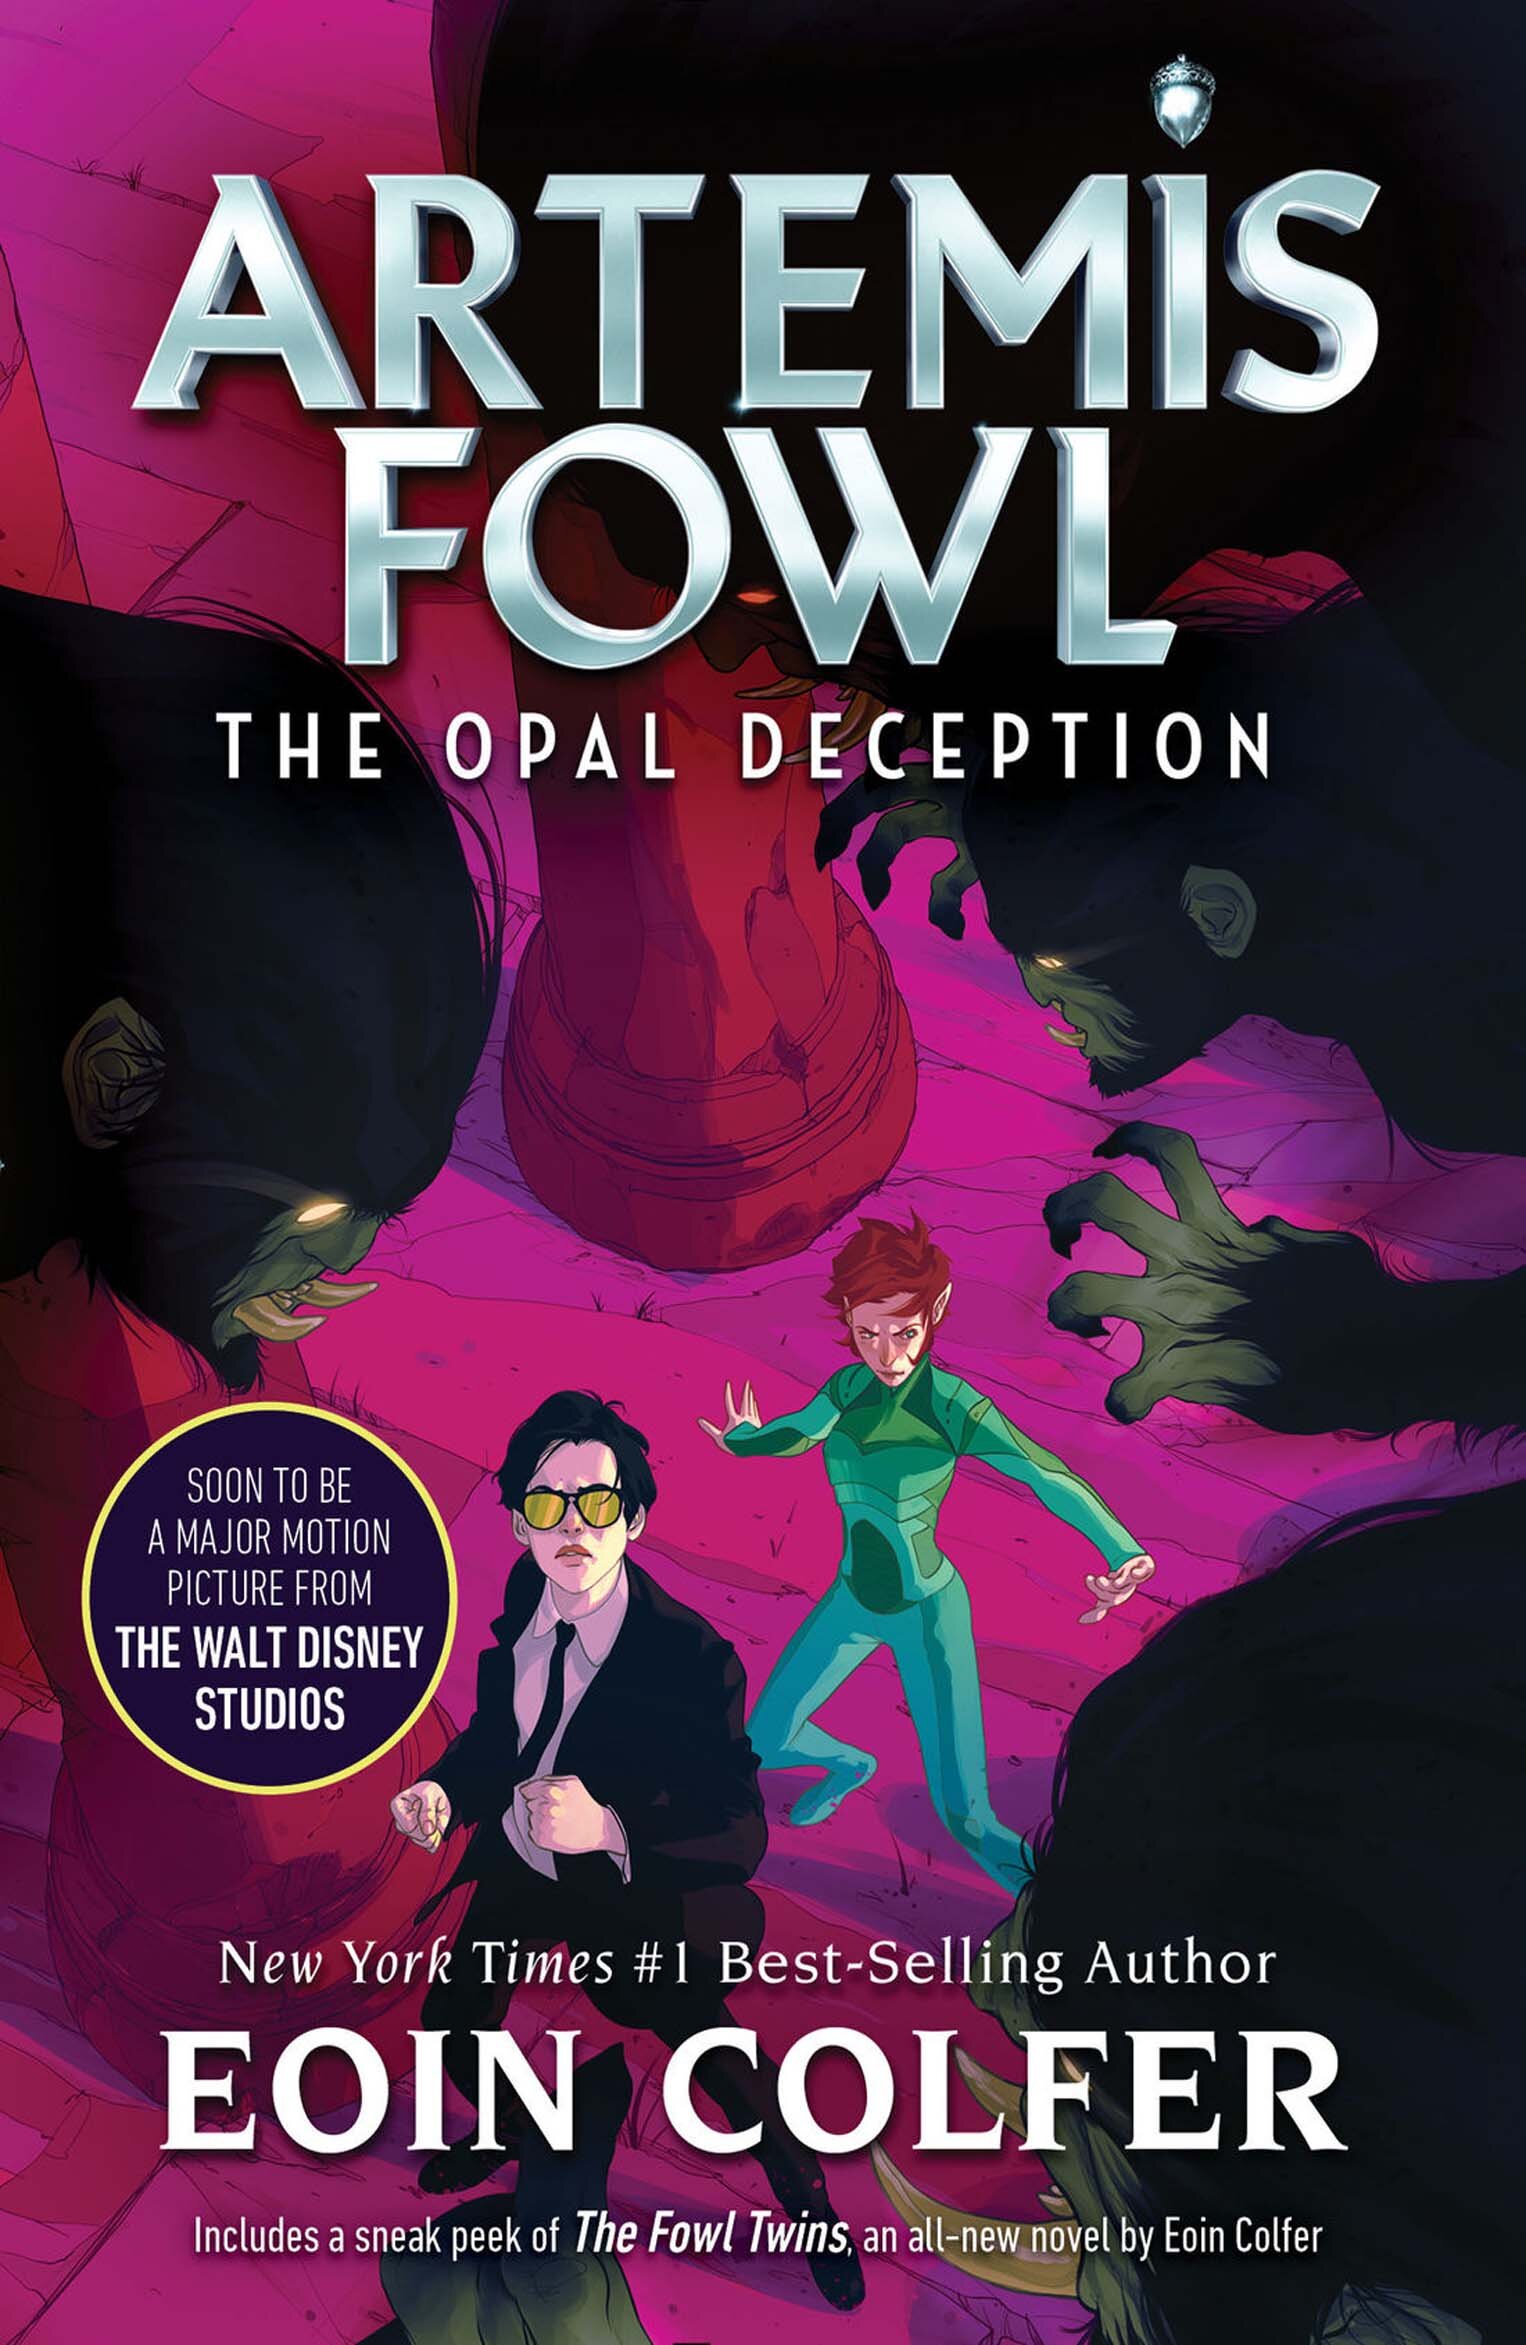 Discuss Everything About Artemis Fowl